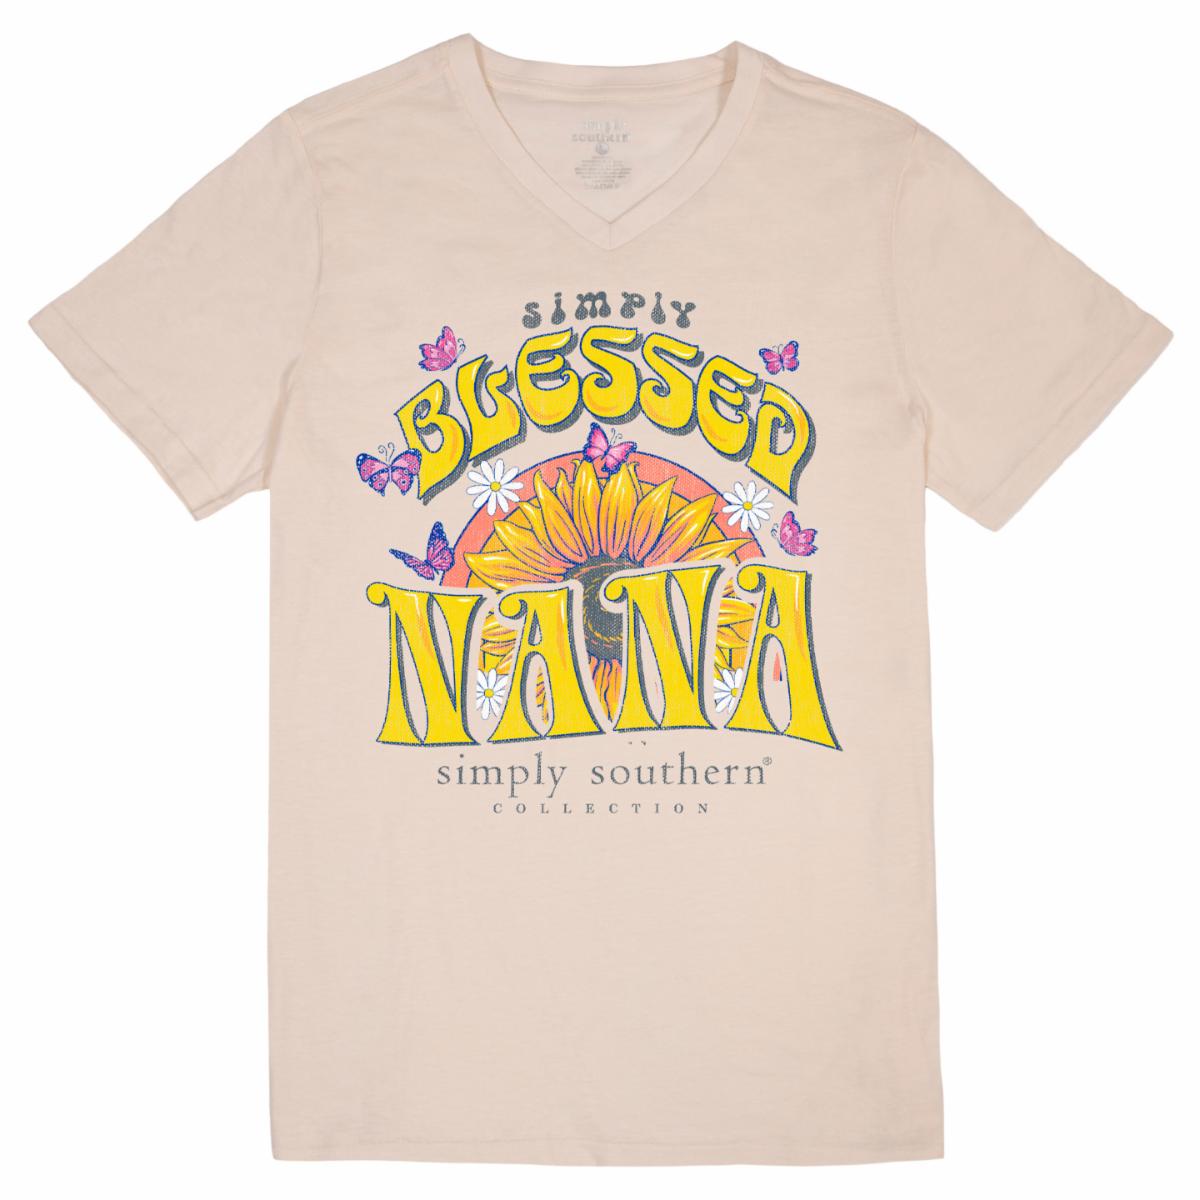 'Simply Blessed Nana' Short Sleeve V-Neck Tee by Simply Southern